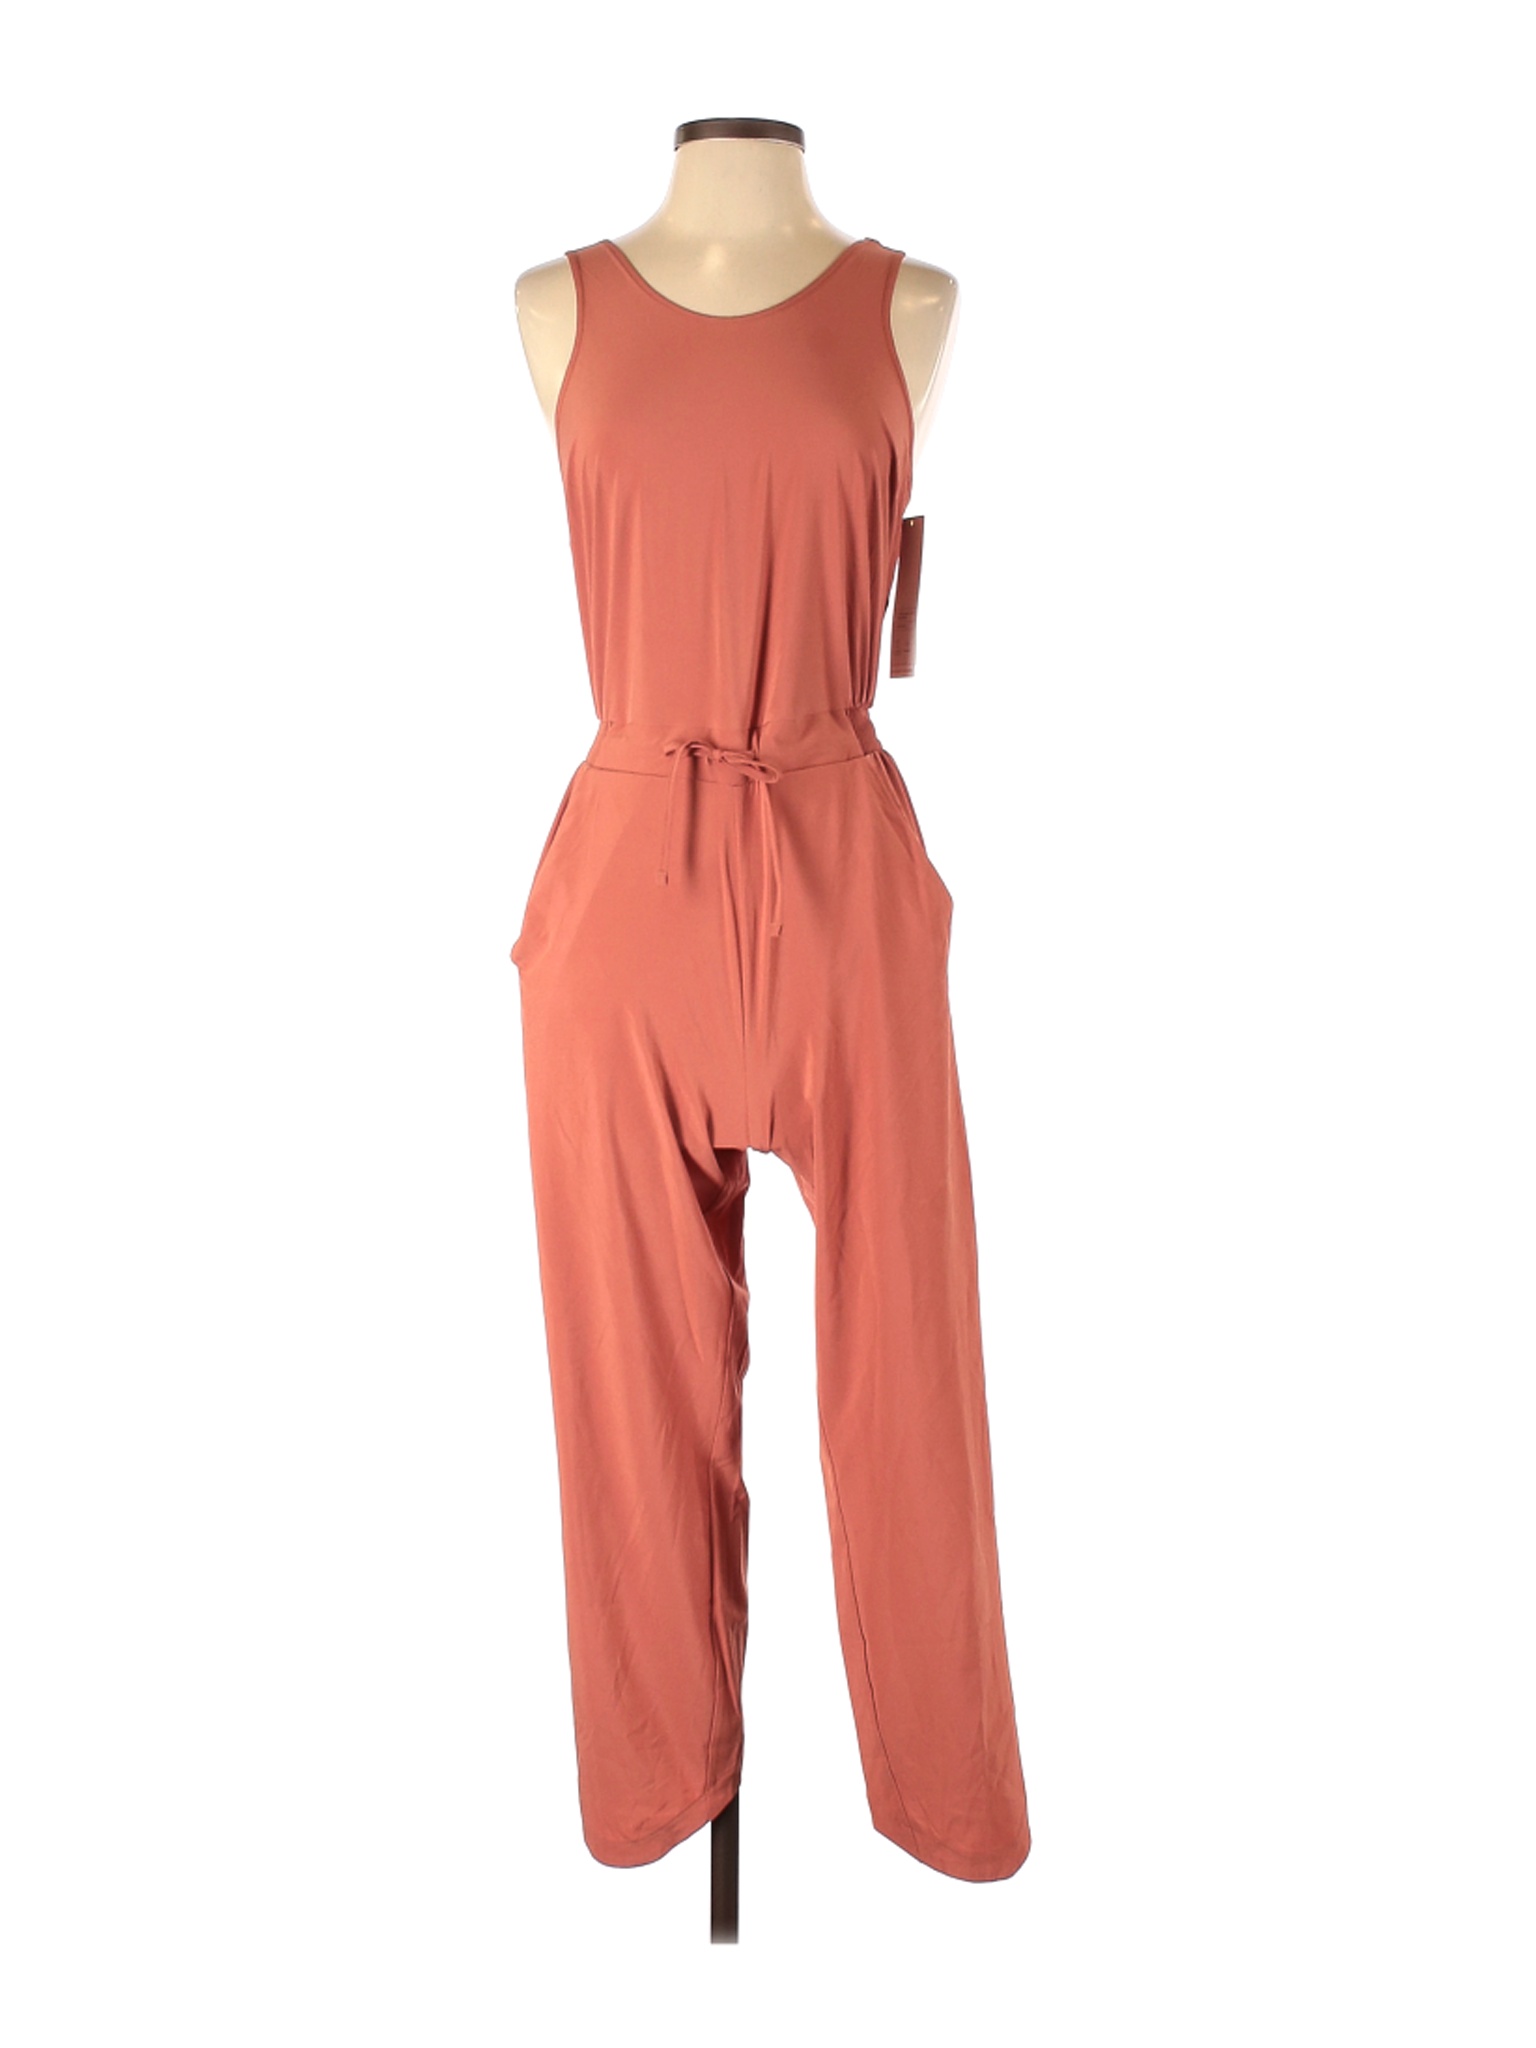 NWT All in motion Women Pink Jumpsuit XS | eBay